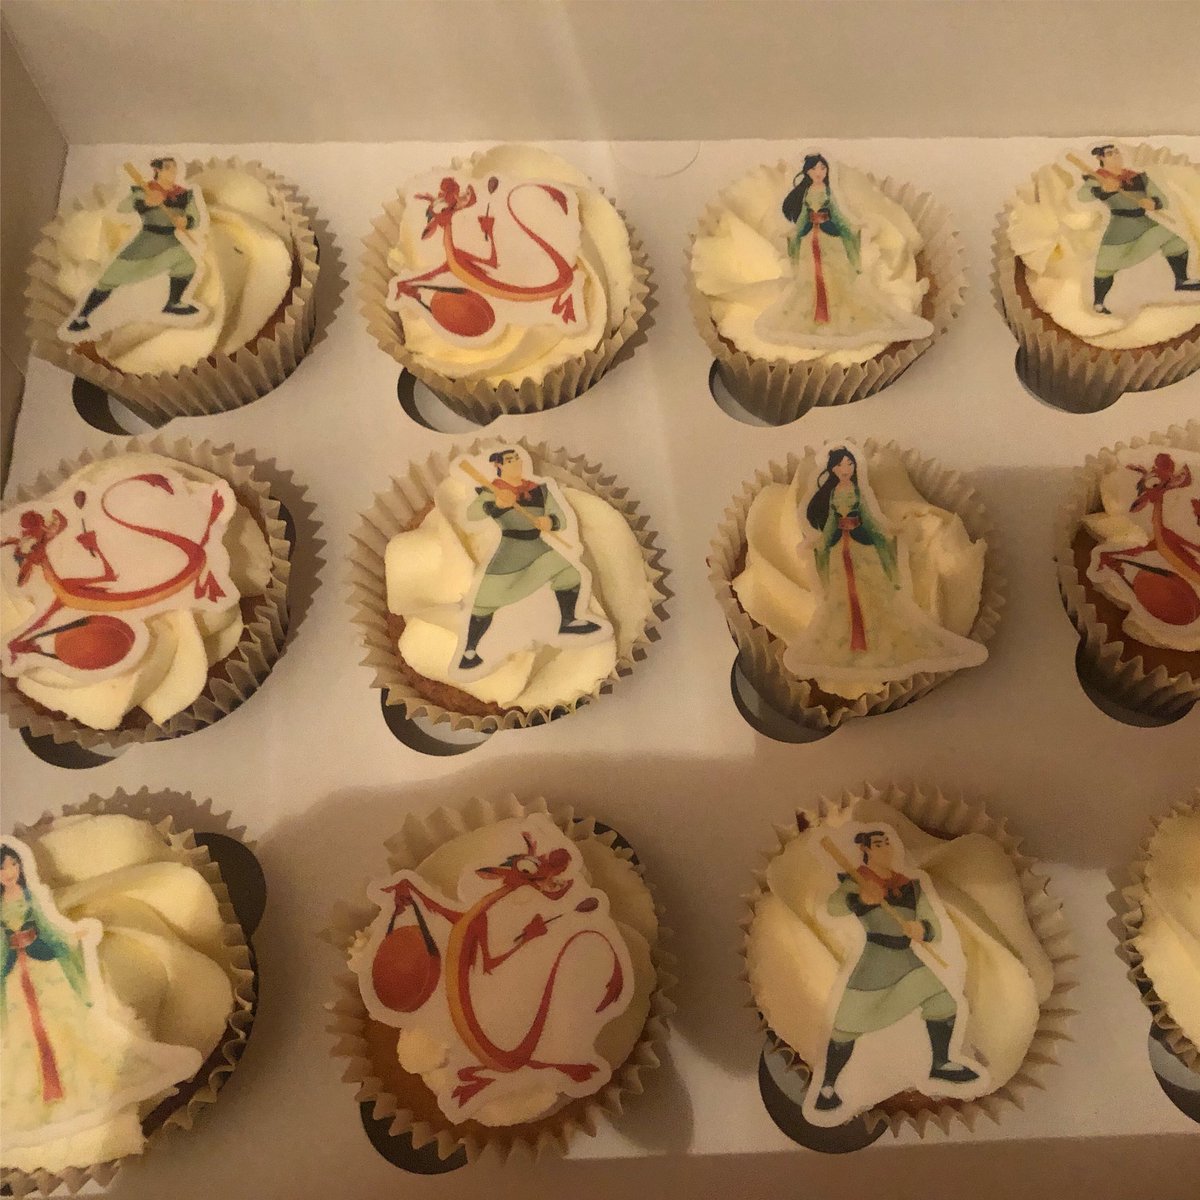 More cupcakes! 🧁 Today we have some gorgeous vanilla cupcakes with topped with edible #mulan cupcake toppers for a very special 4 year old #princess 👑🧁 ❤️#cupcakeheaven #cupcakesforalloccasions #veganoptionsavailable #cupcakesofinstagram